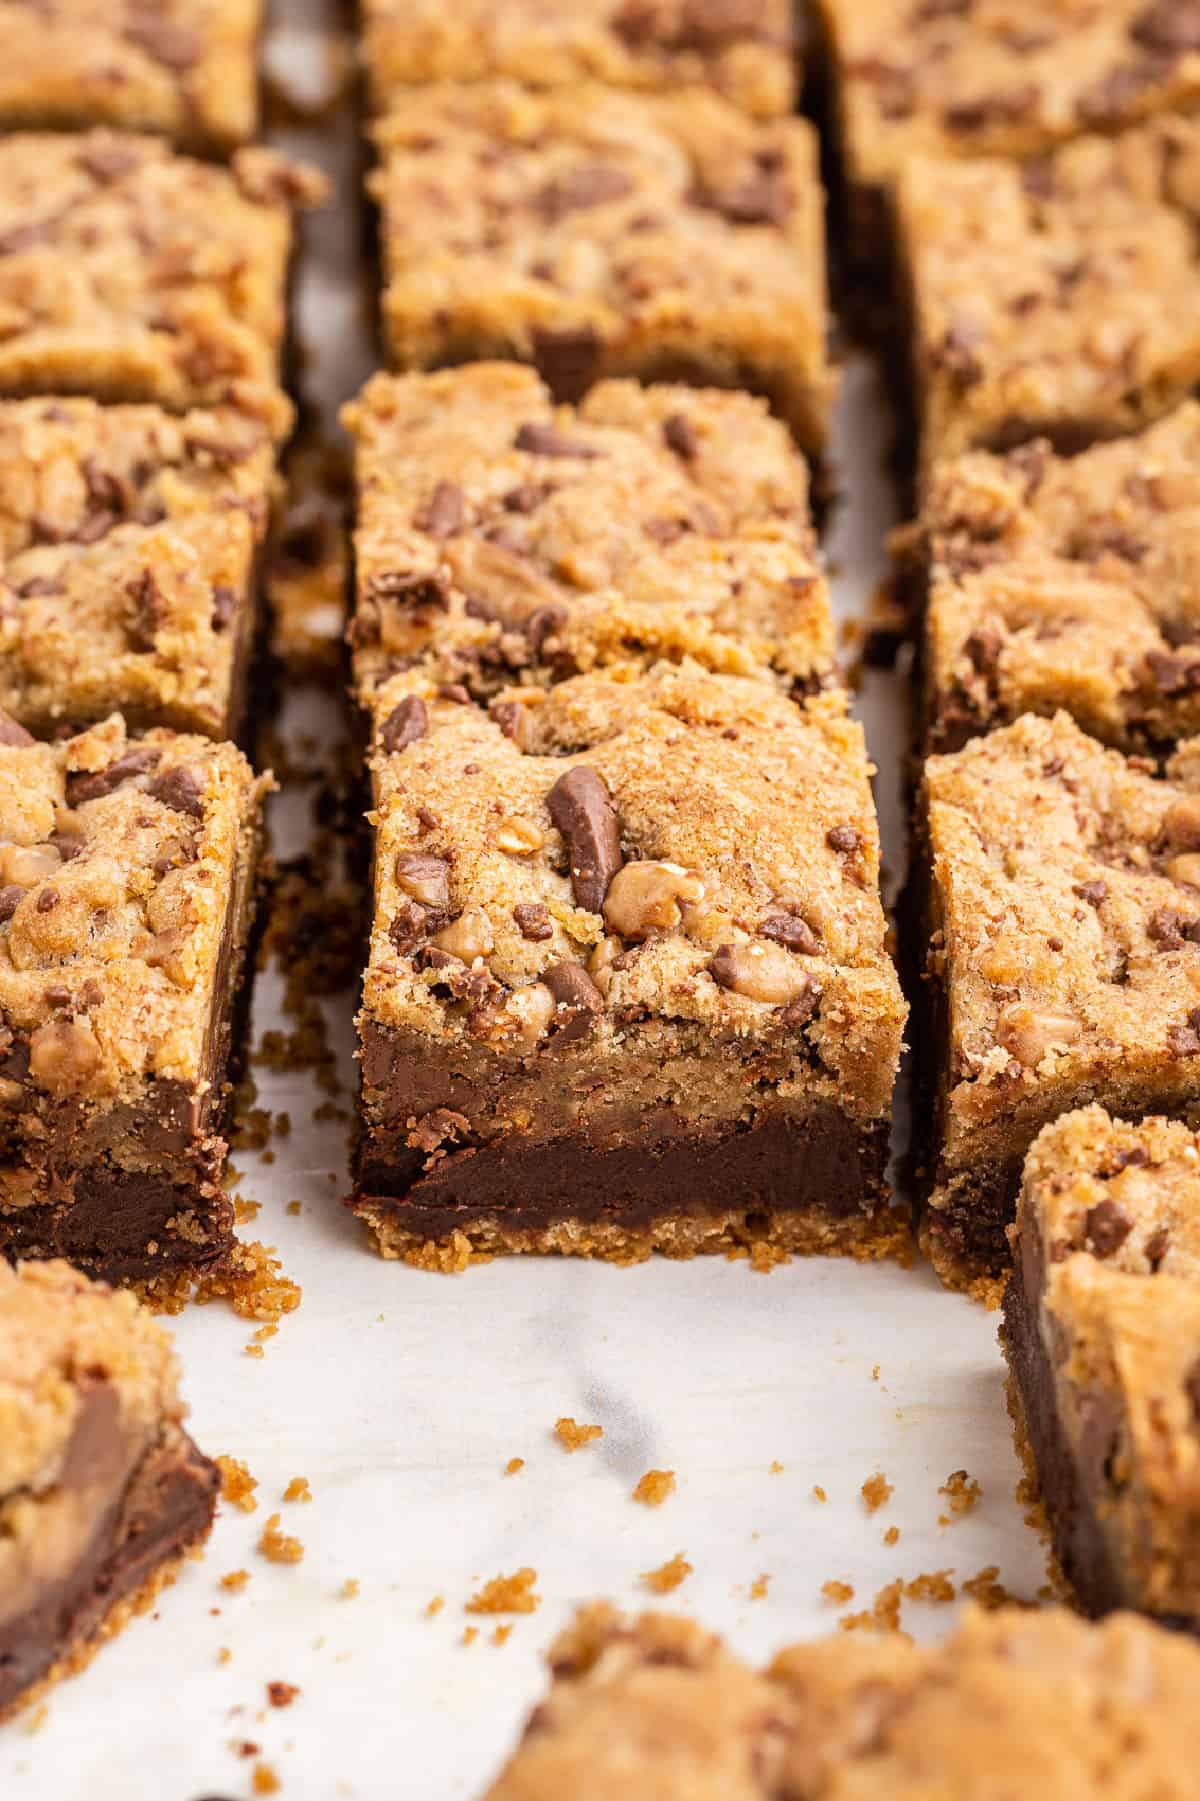 Toffee chocolate chip layered cookie bars cut into squares.